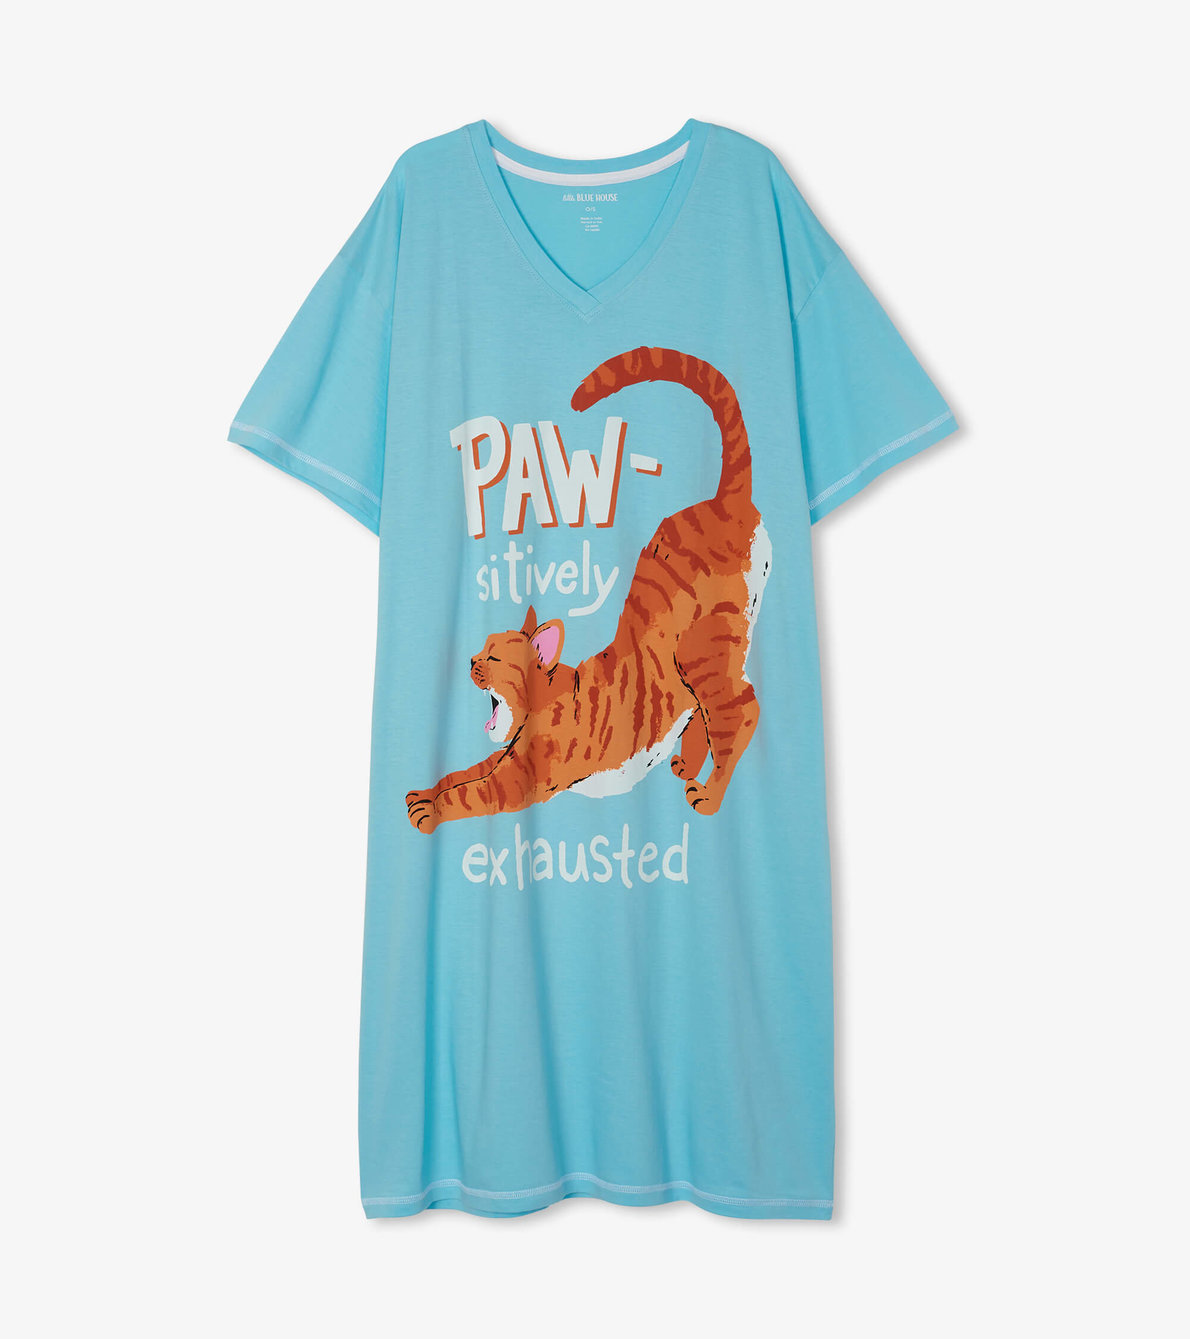 View larger image of PAWsitively Exhausted Women's Sleepshirt